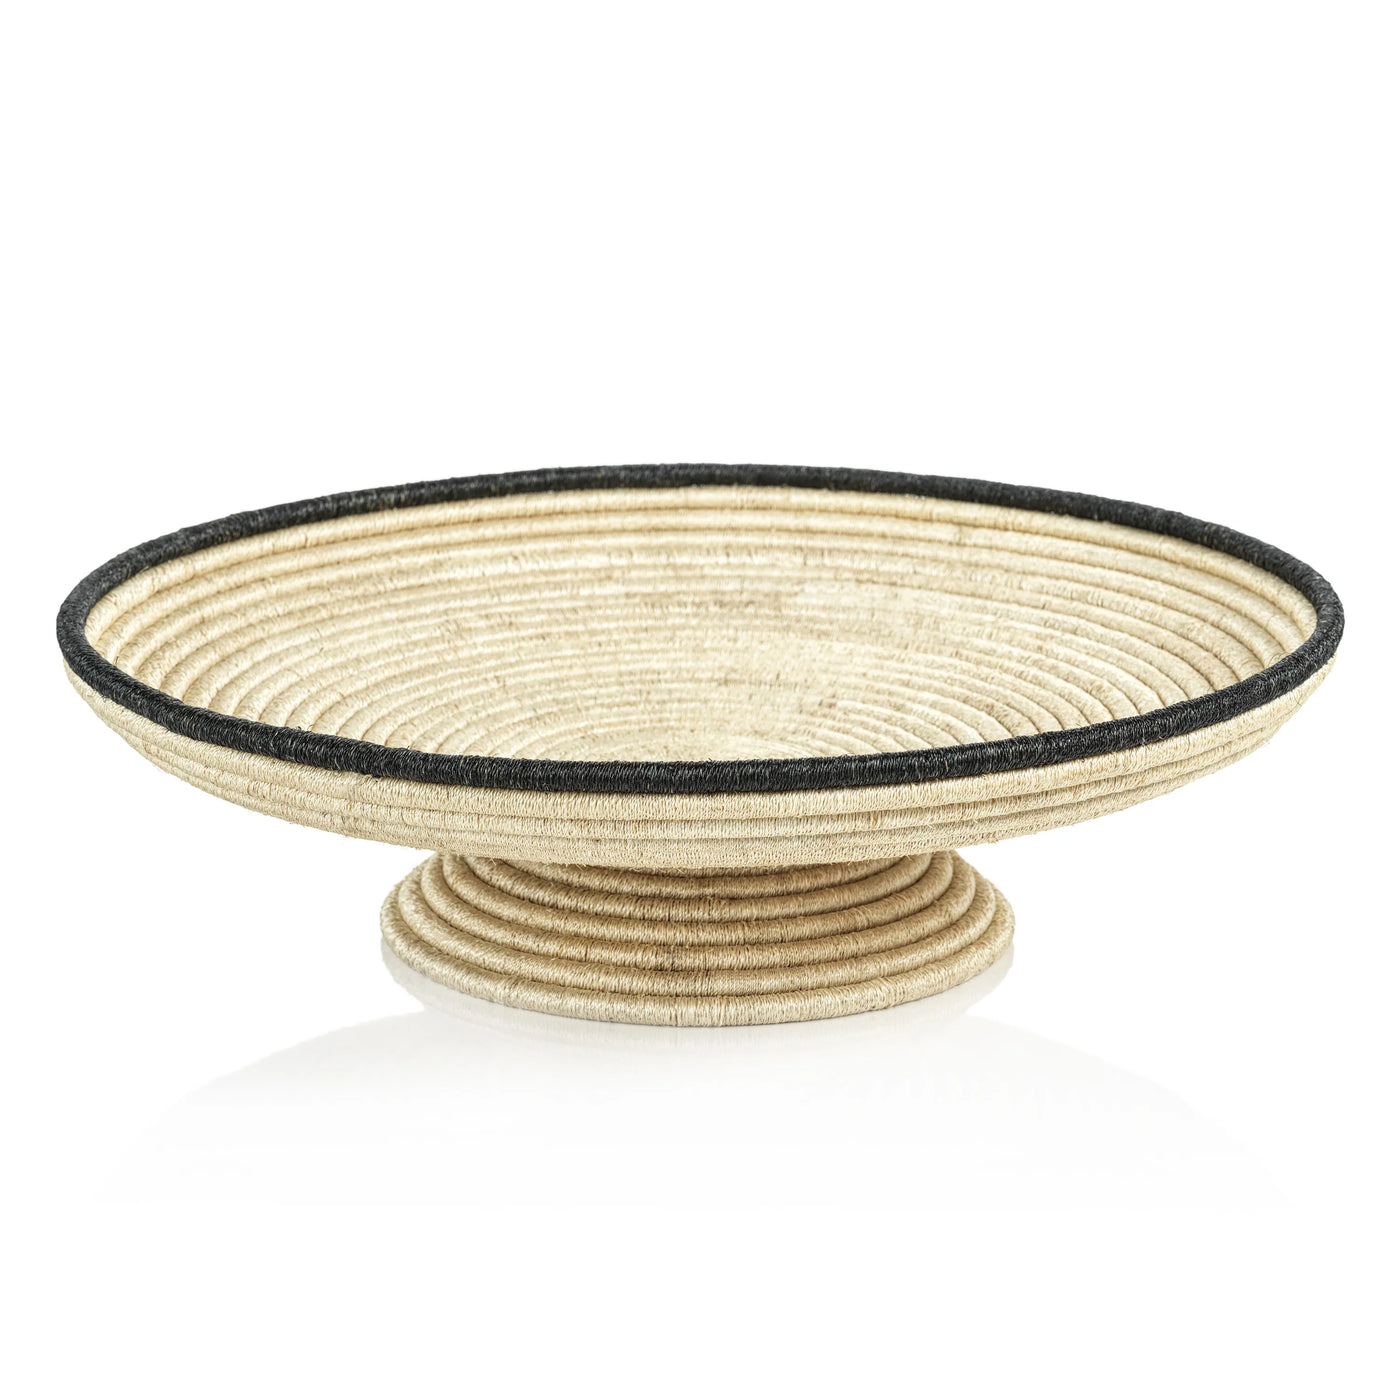 BOWL COILED ABACA FOOTED LARGE